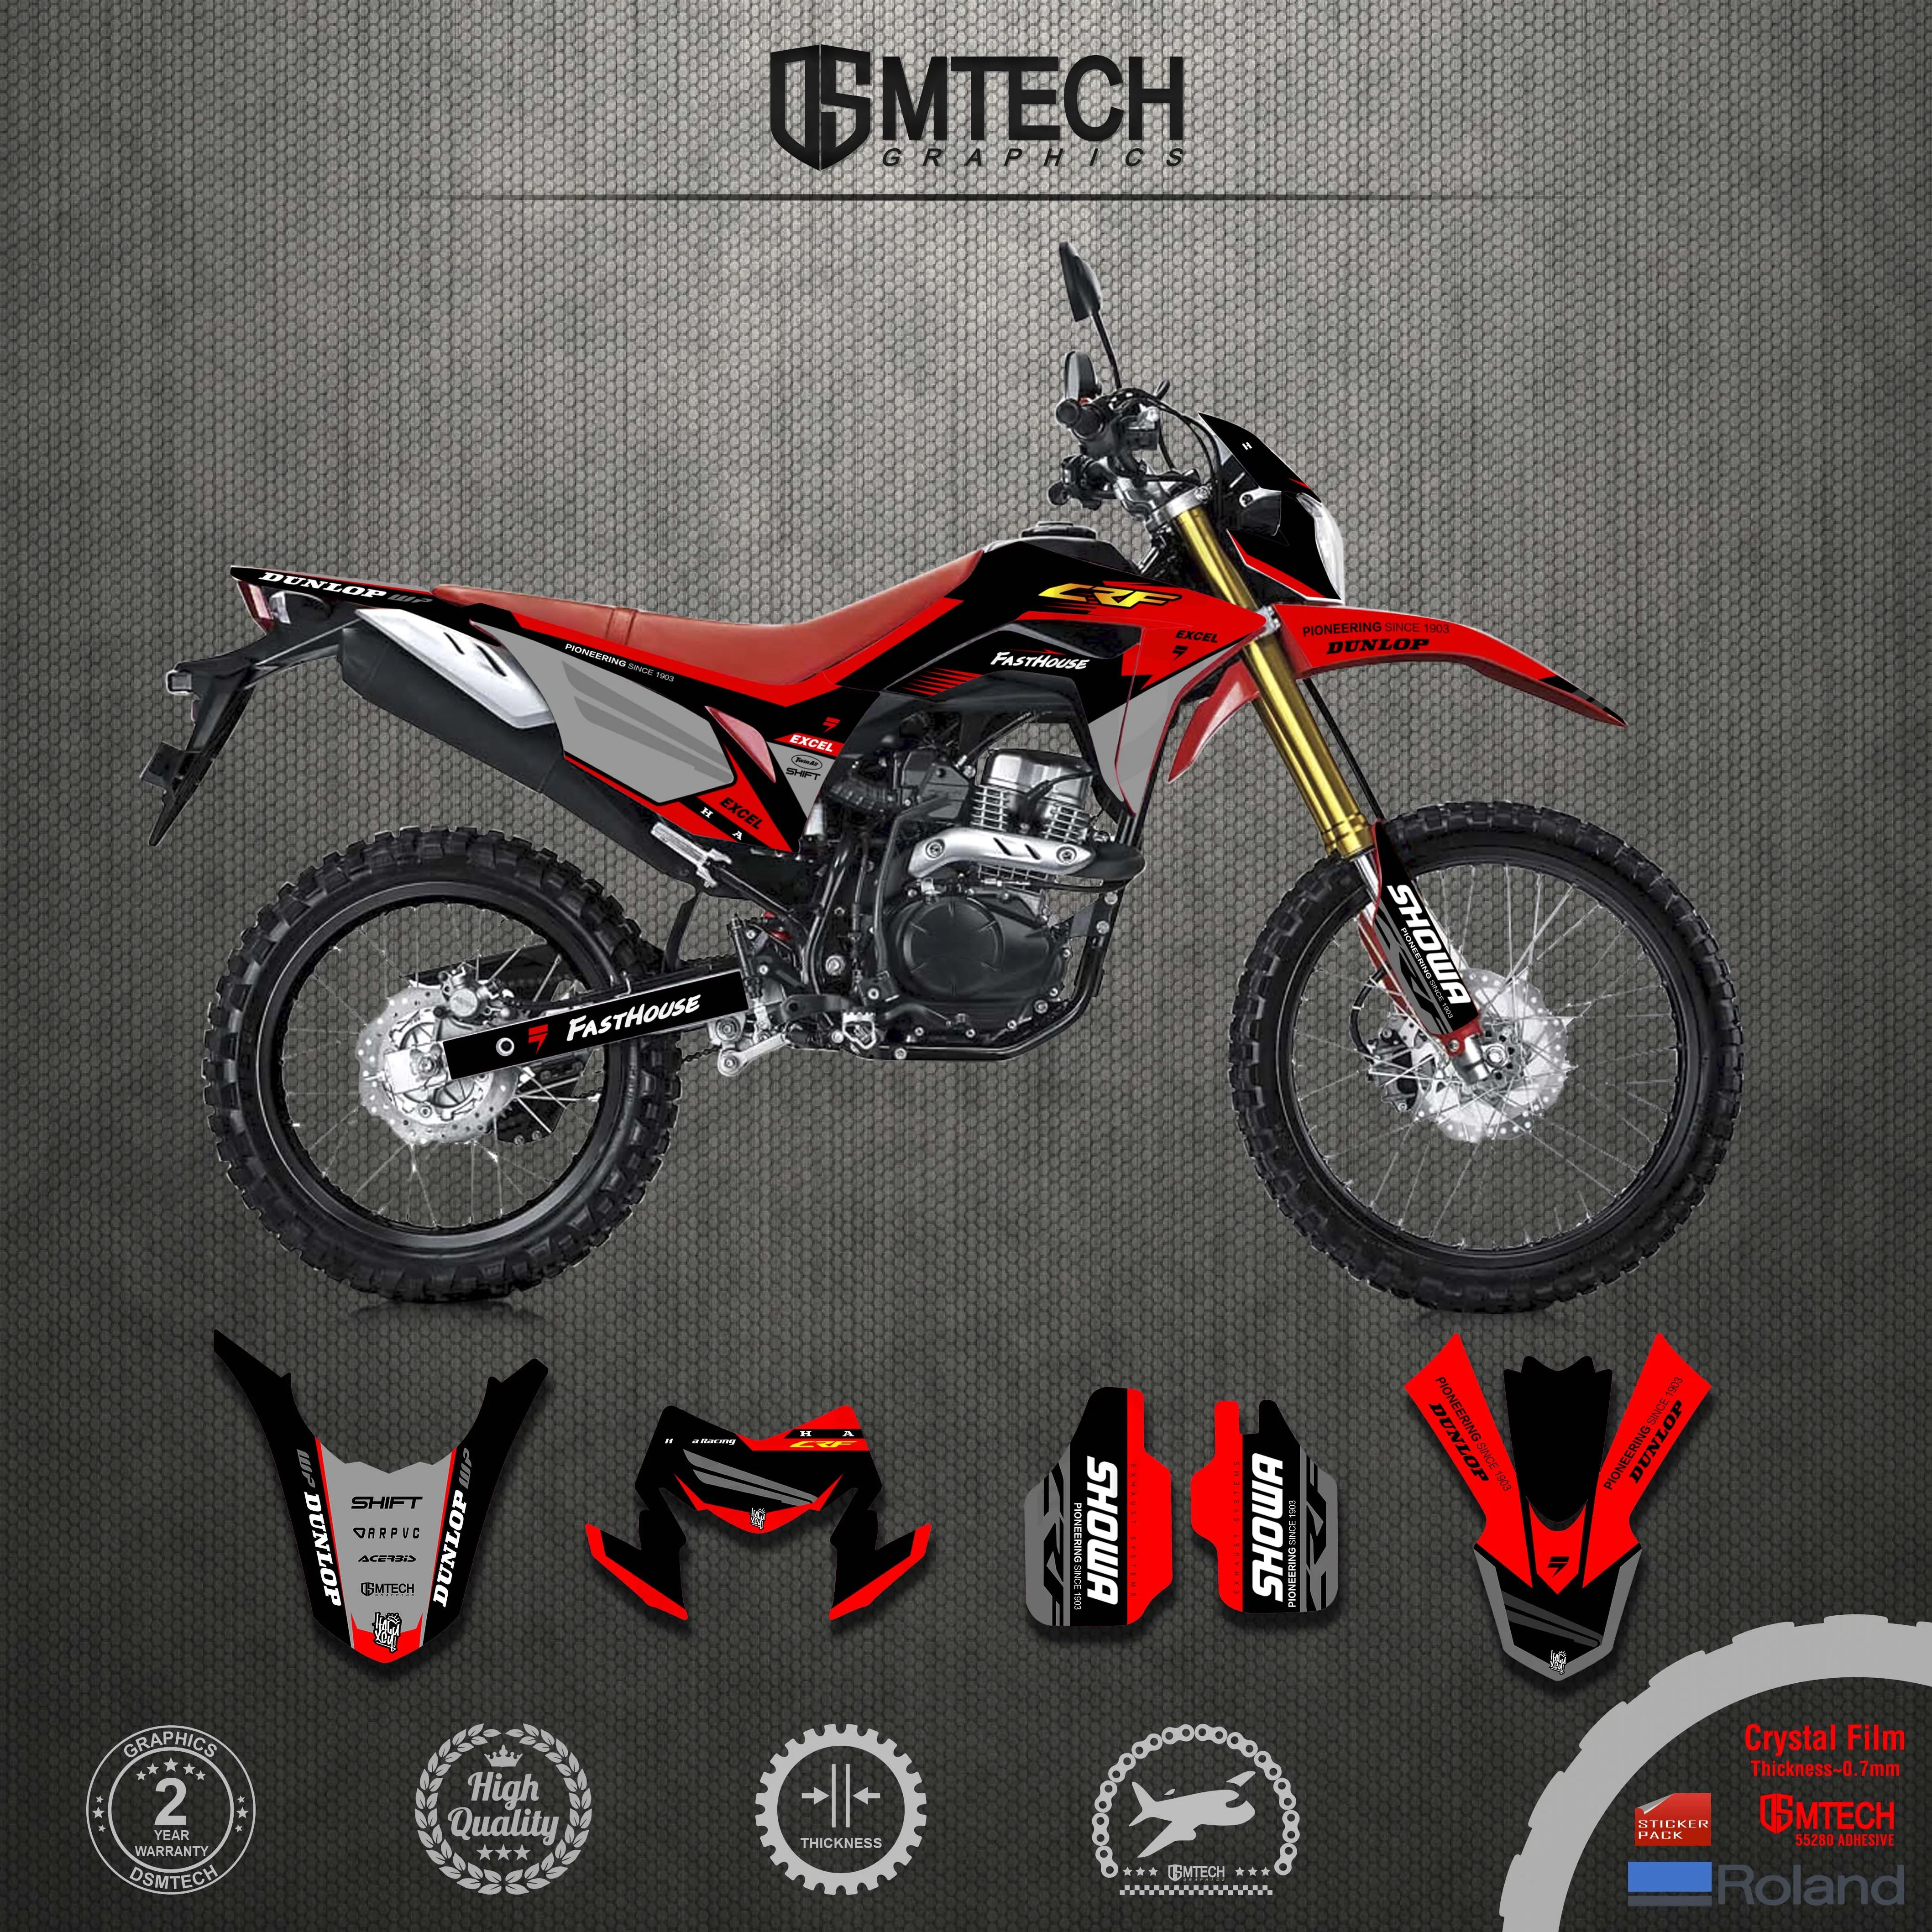 DSMTECH Stickers Motocross Backgrounds Graphics Decals  Kits  For HONDA 2019 2020 2021 CRF 150L 2019-2021 CRF150L CRF150  L